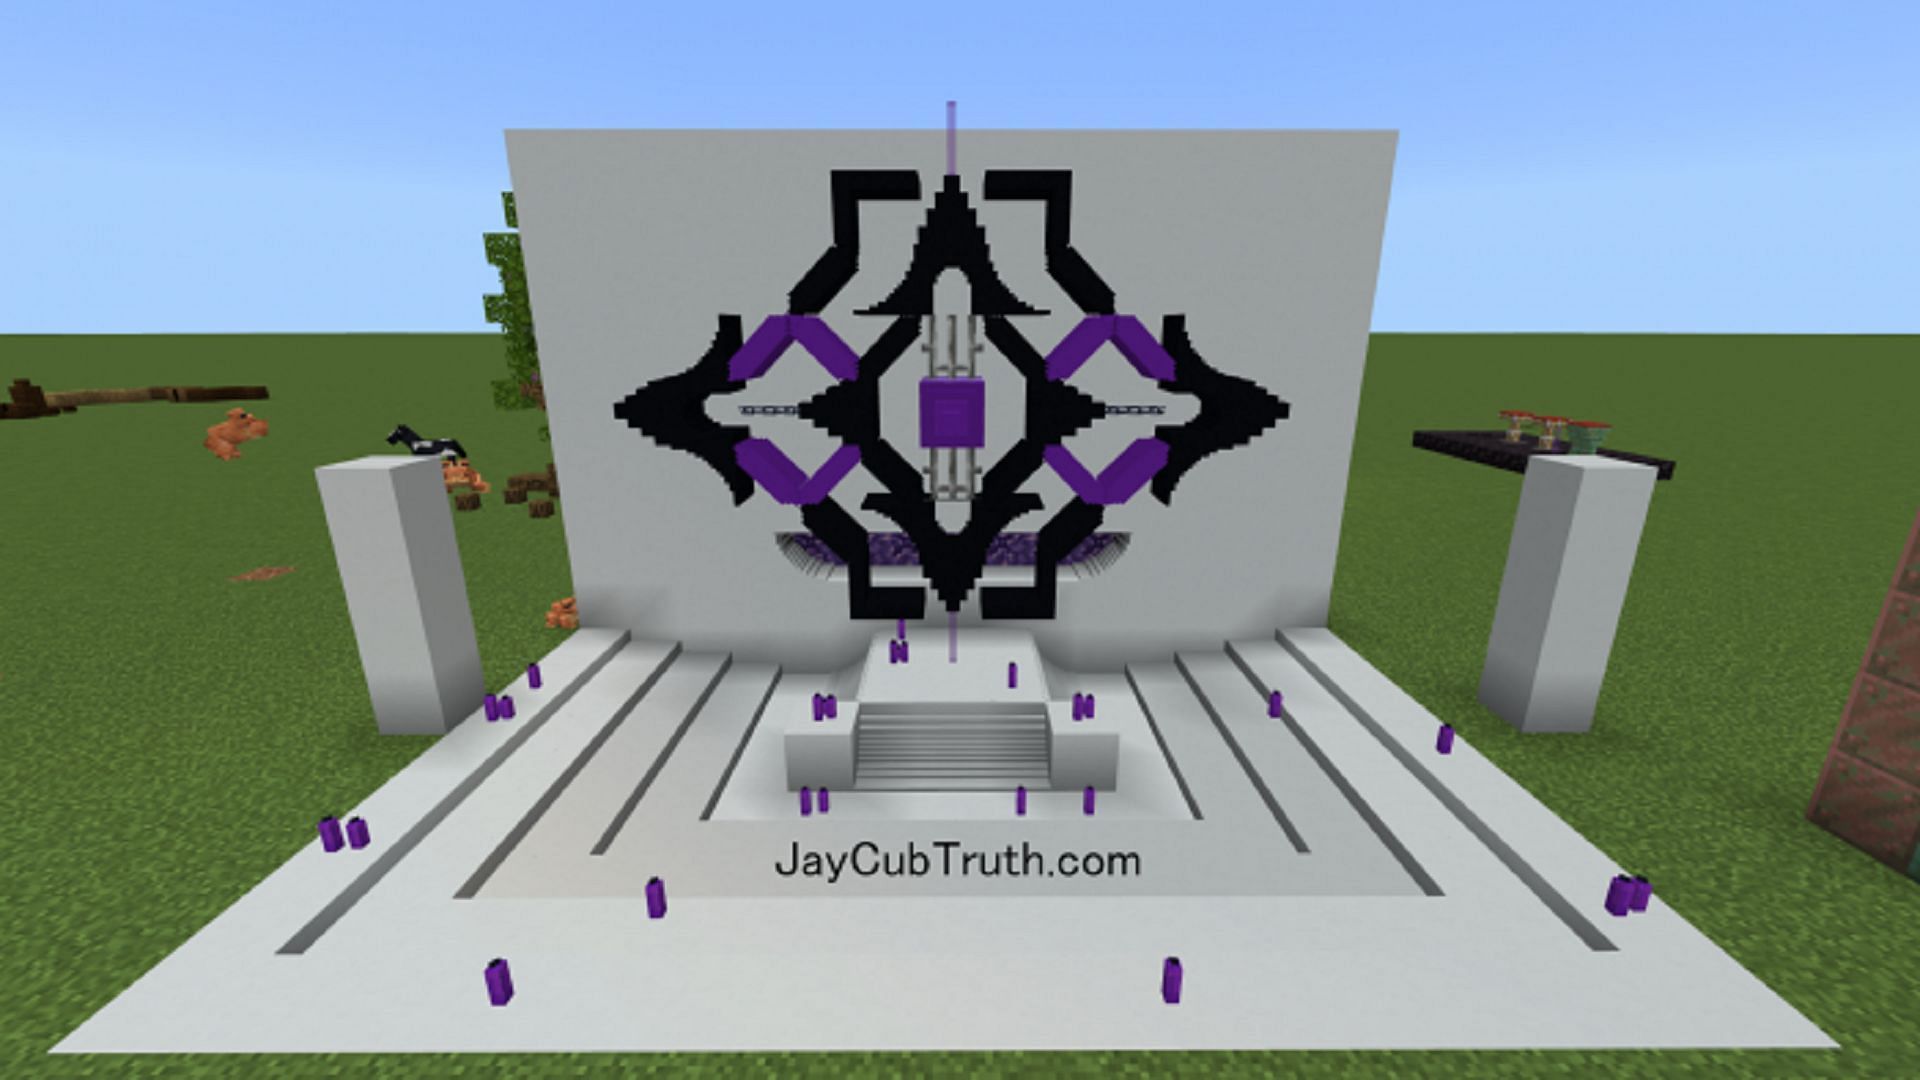 A decorative structure created by the Blockz+ developer (Image via JayCubTruth)